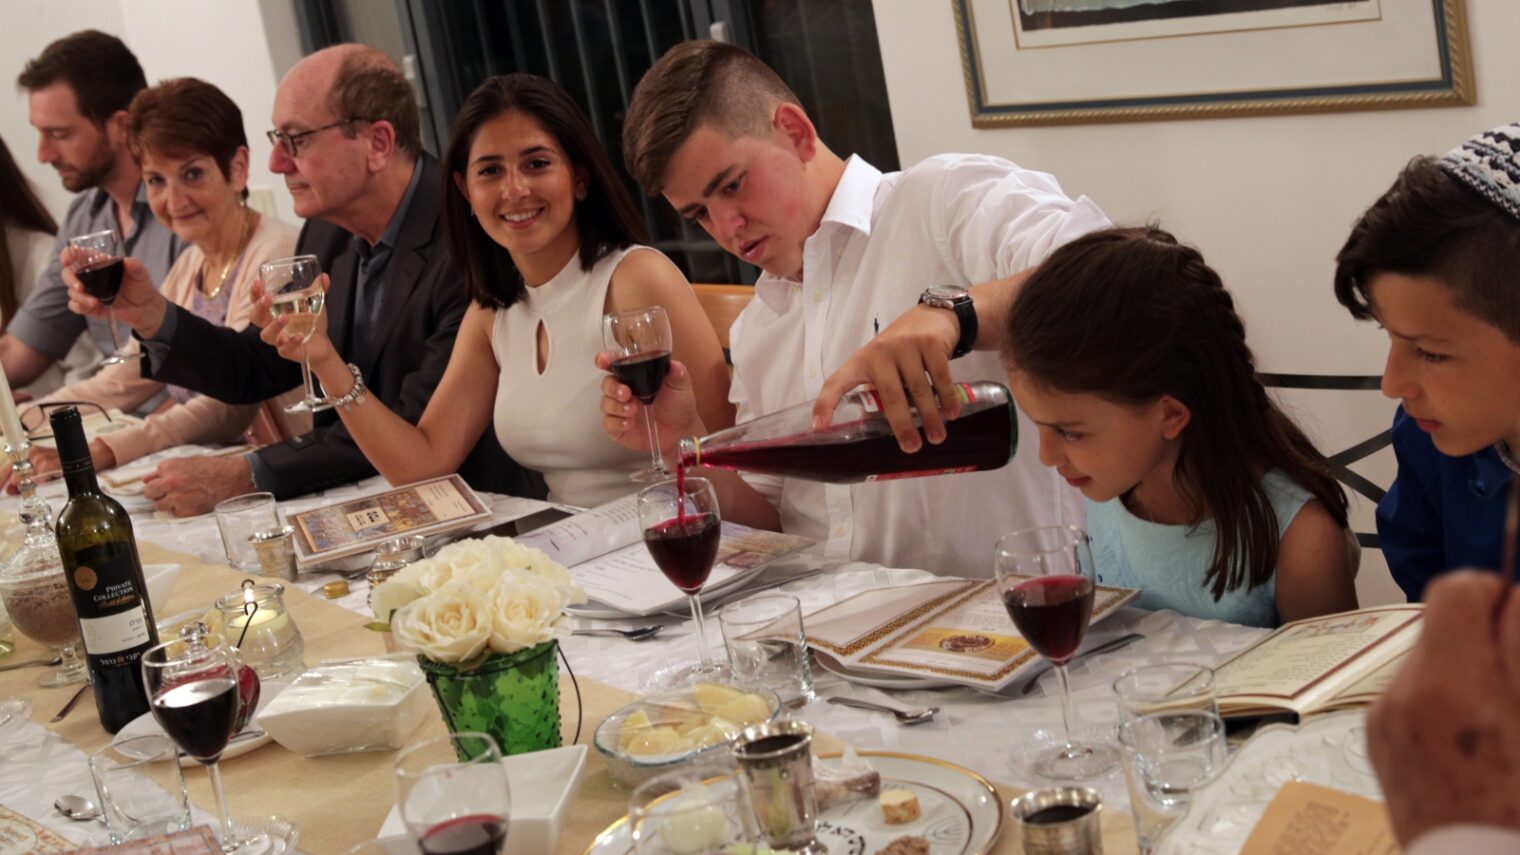 An Israeli family around the Seder table. Photo by Nati Shohat/FLASH90